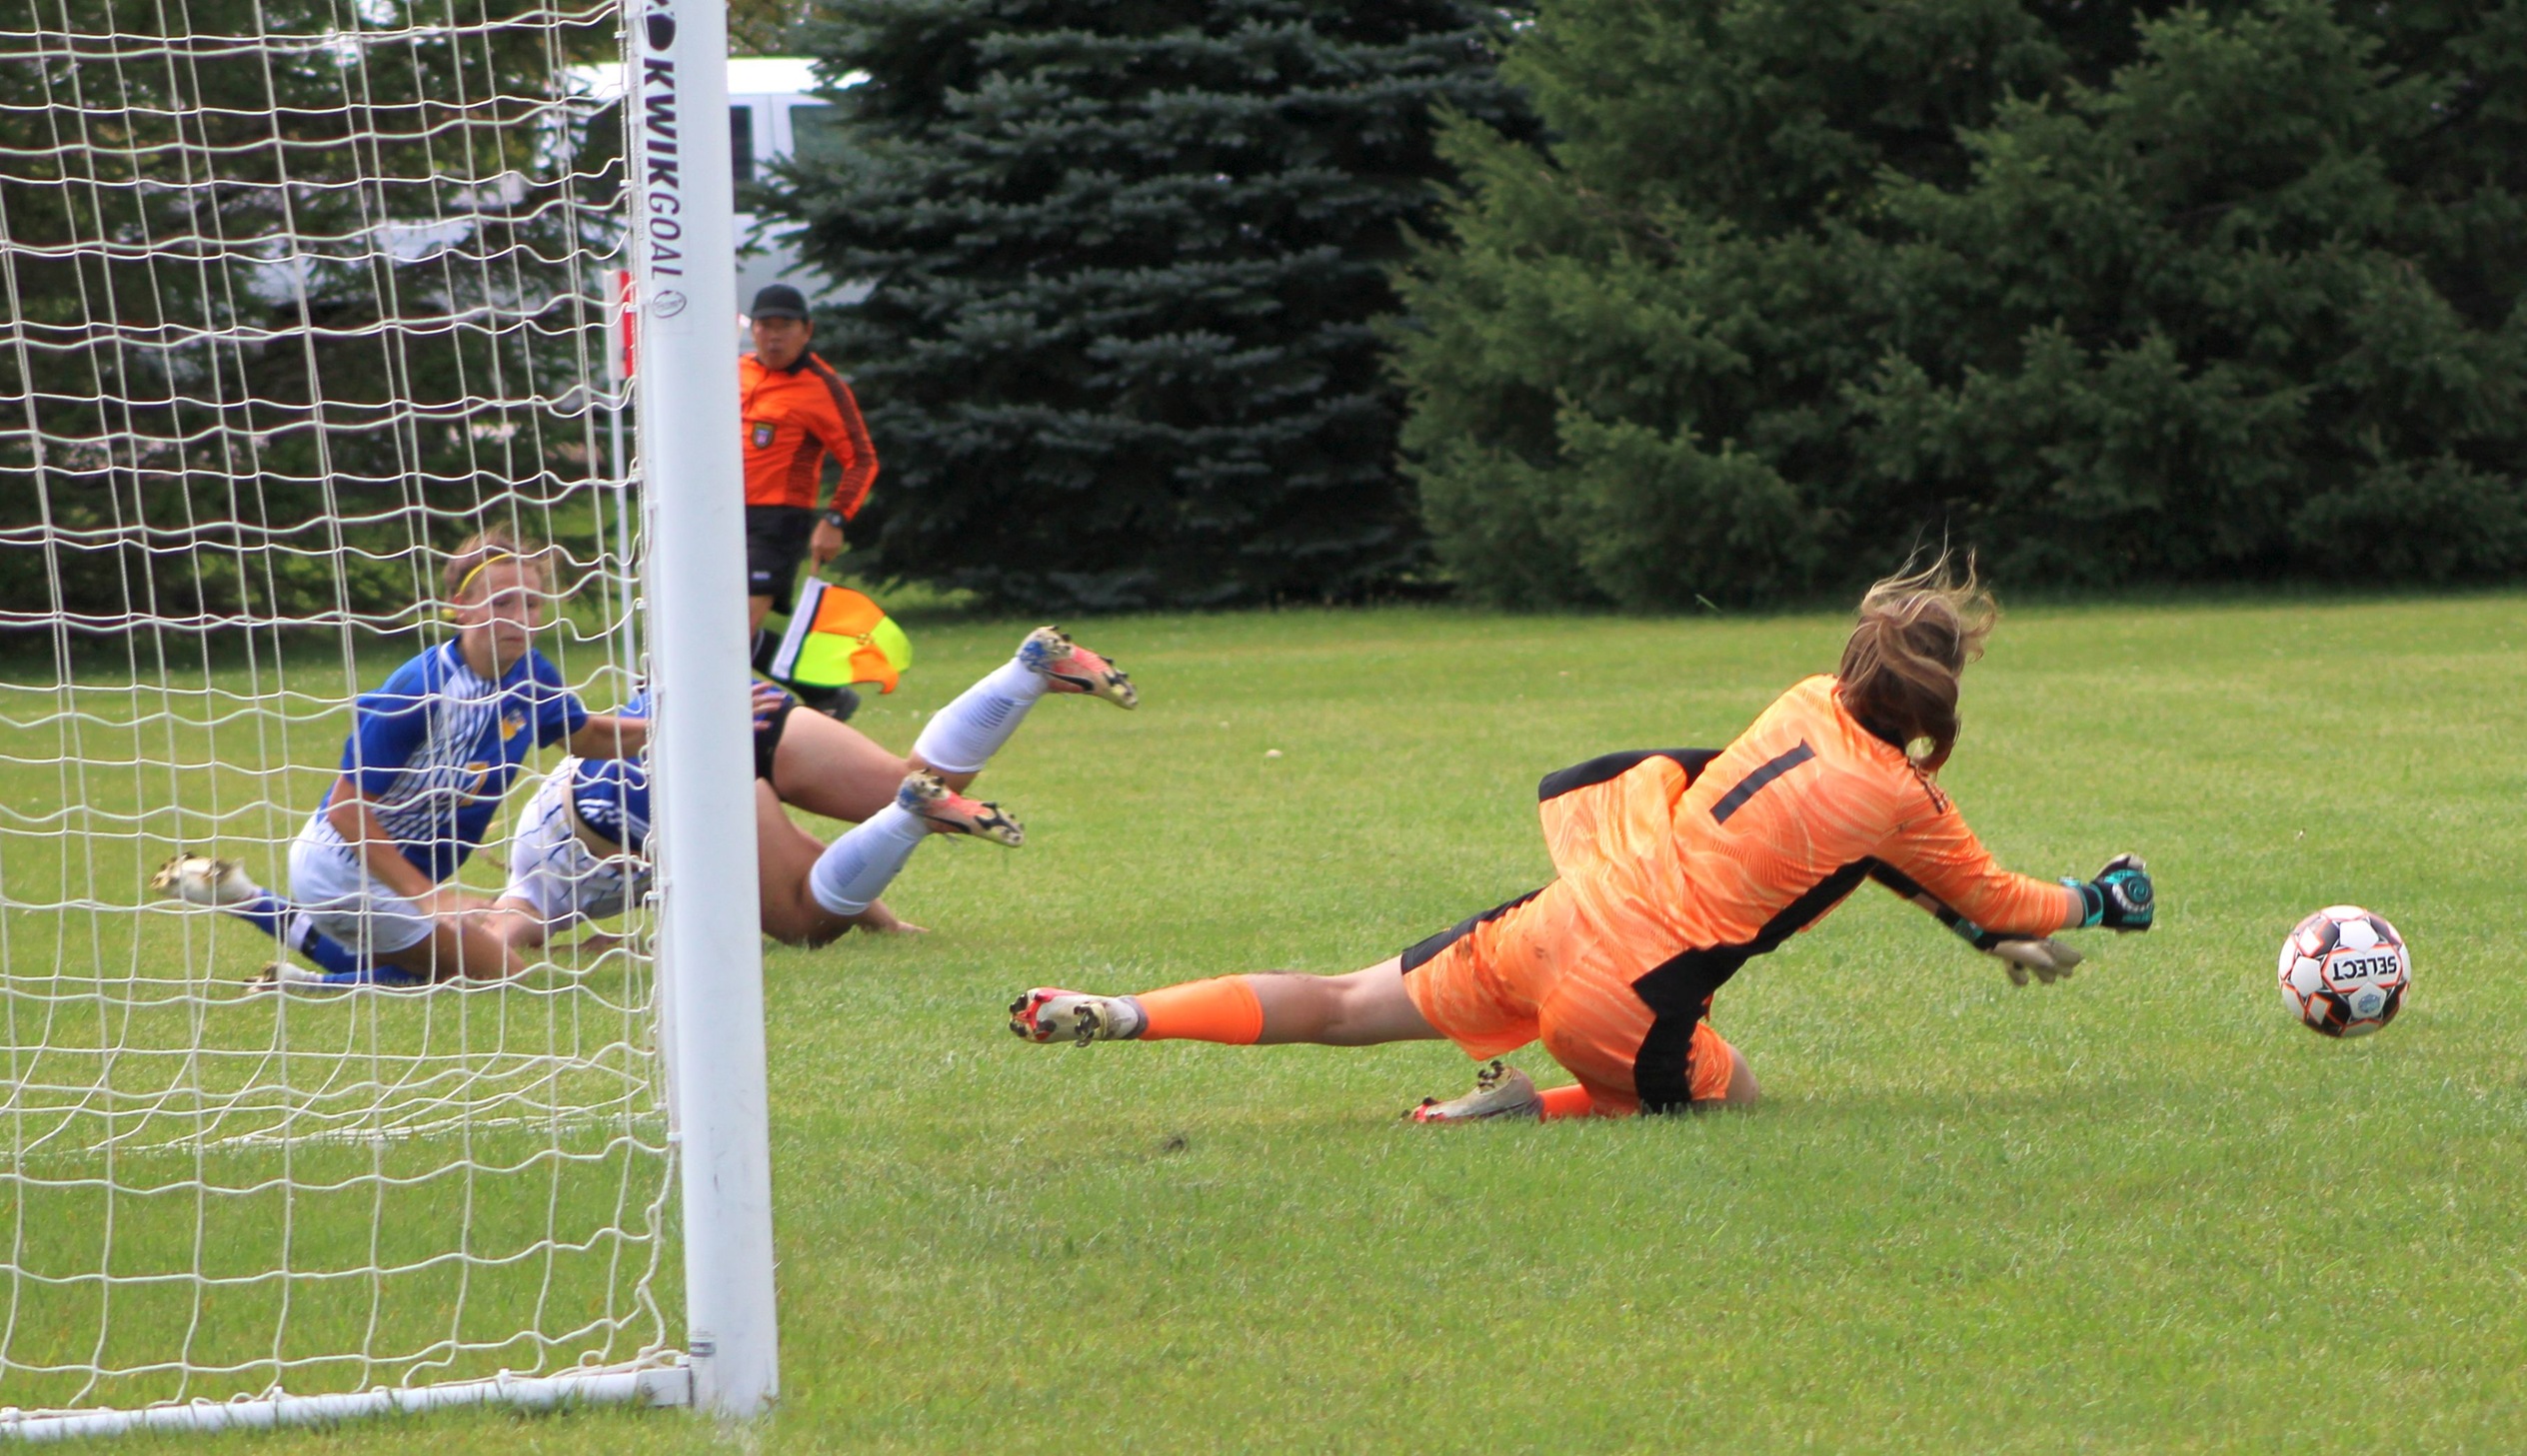 NIACC's Hailey Crew stops a shot on goal in Saturday's 6-0 win over Anoka-Ramsey CC.